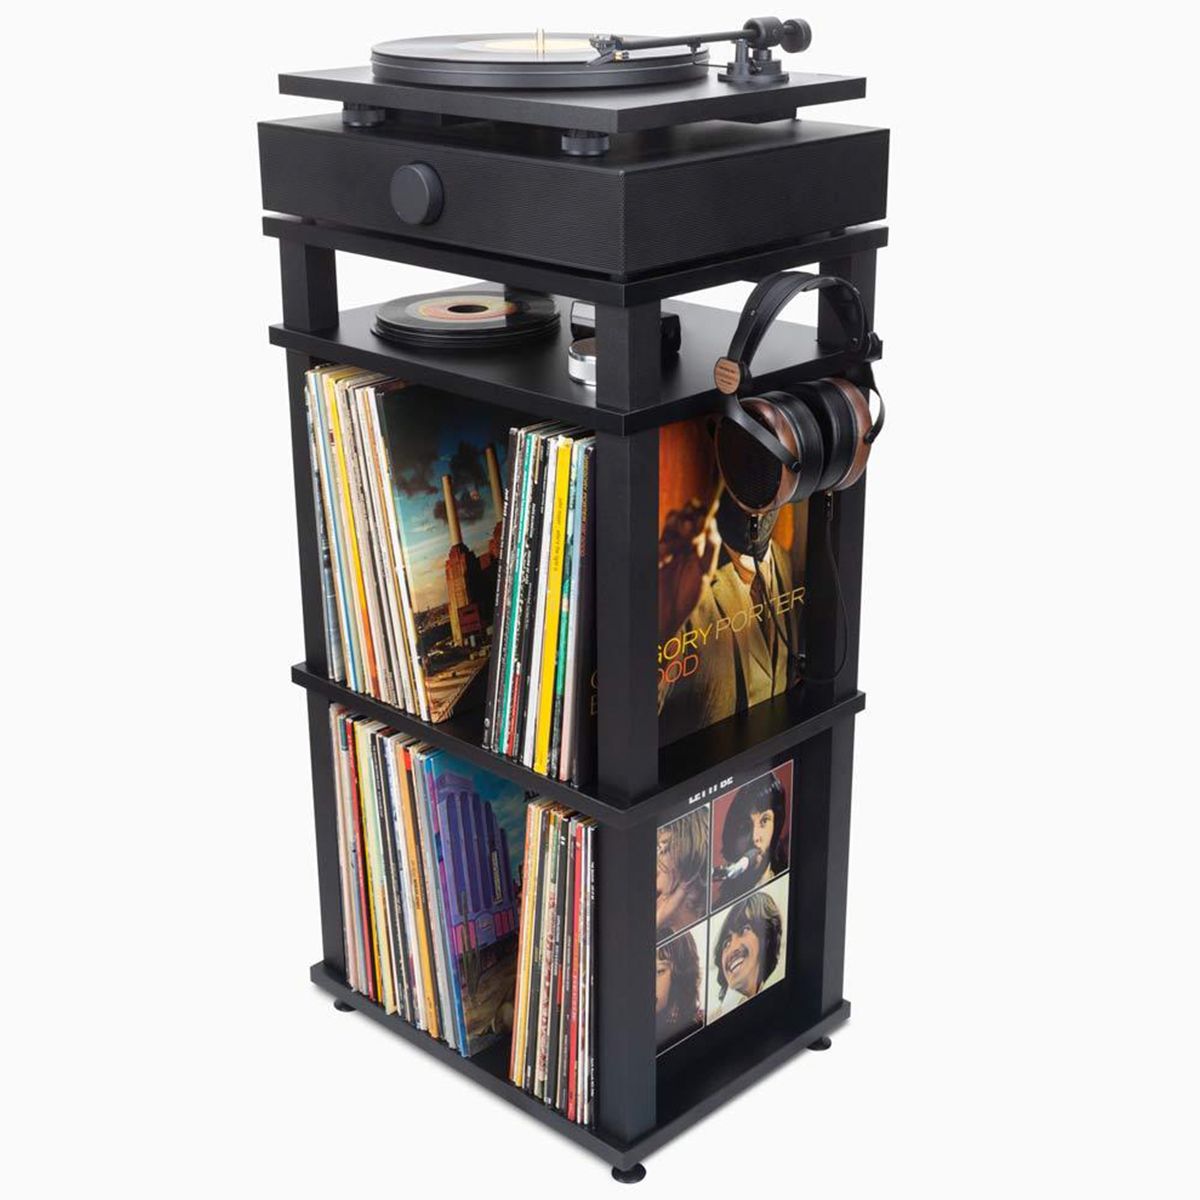 Andover Audio SpinStand Audio Component & Record Rack